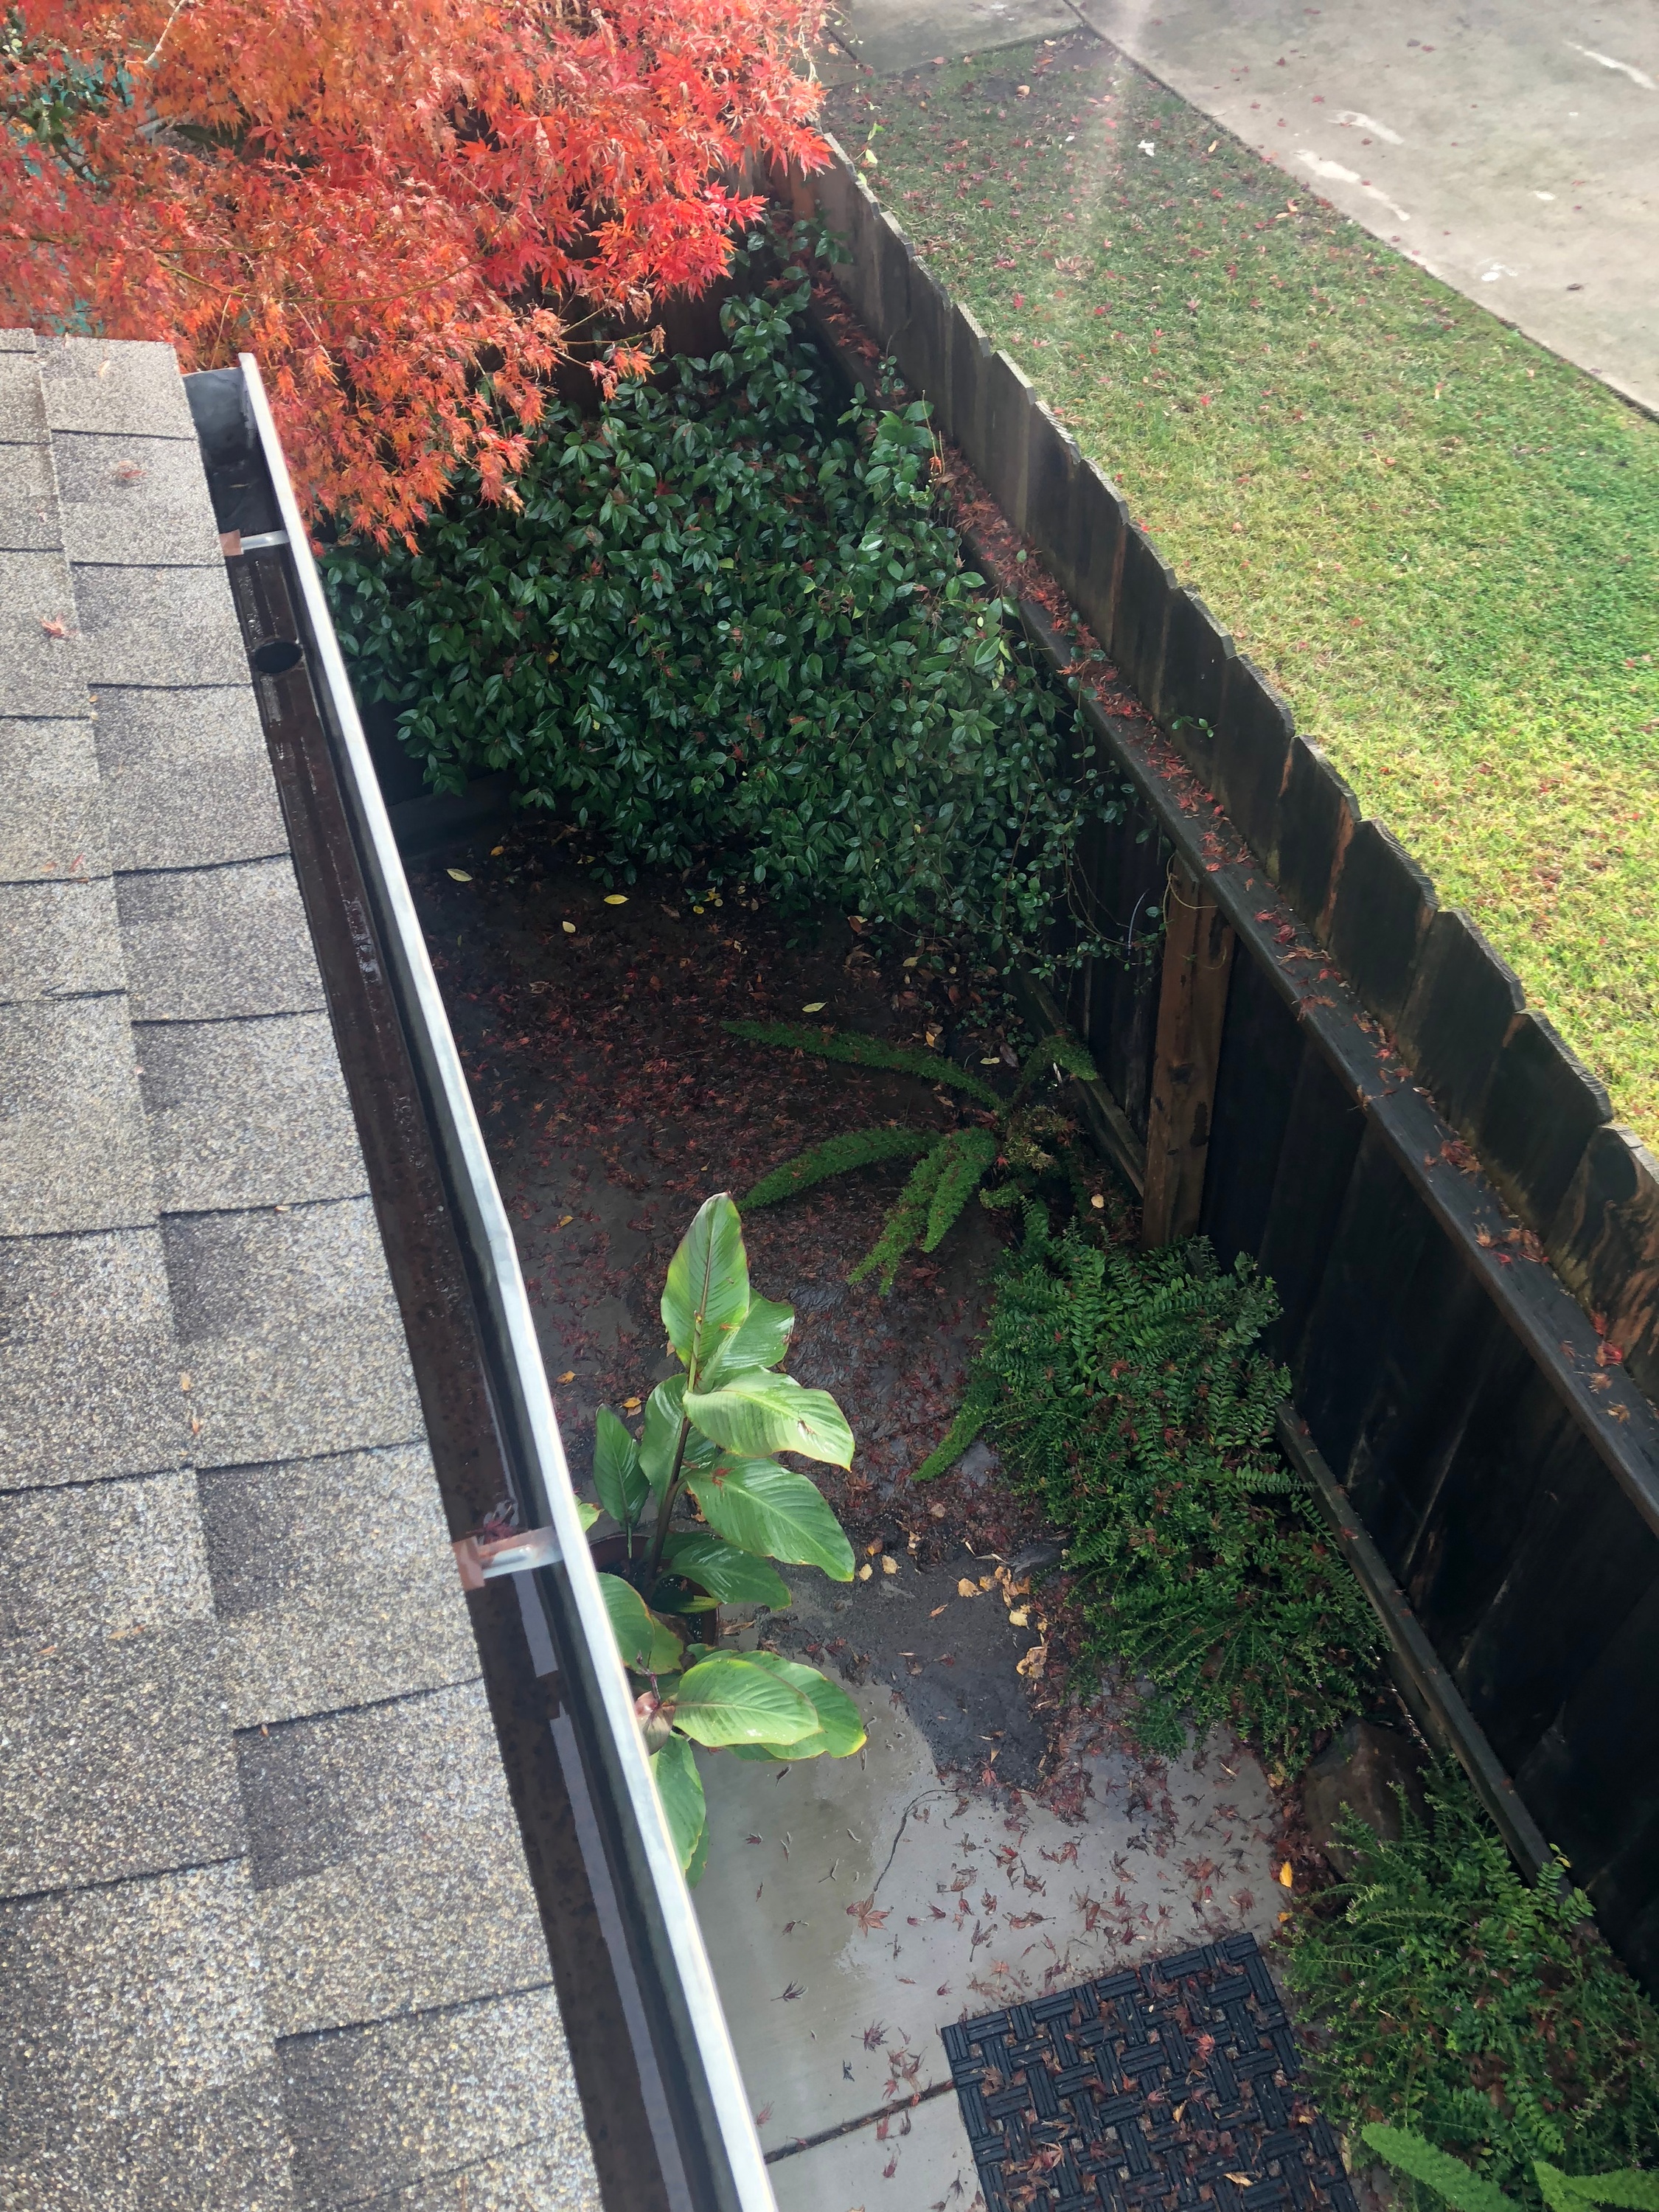 Clean Pro Gutter Cleaning Springfield